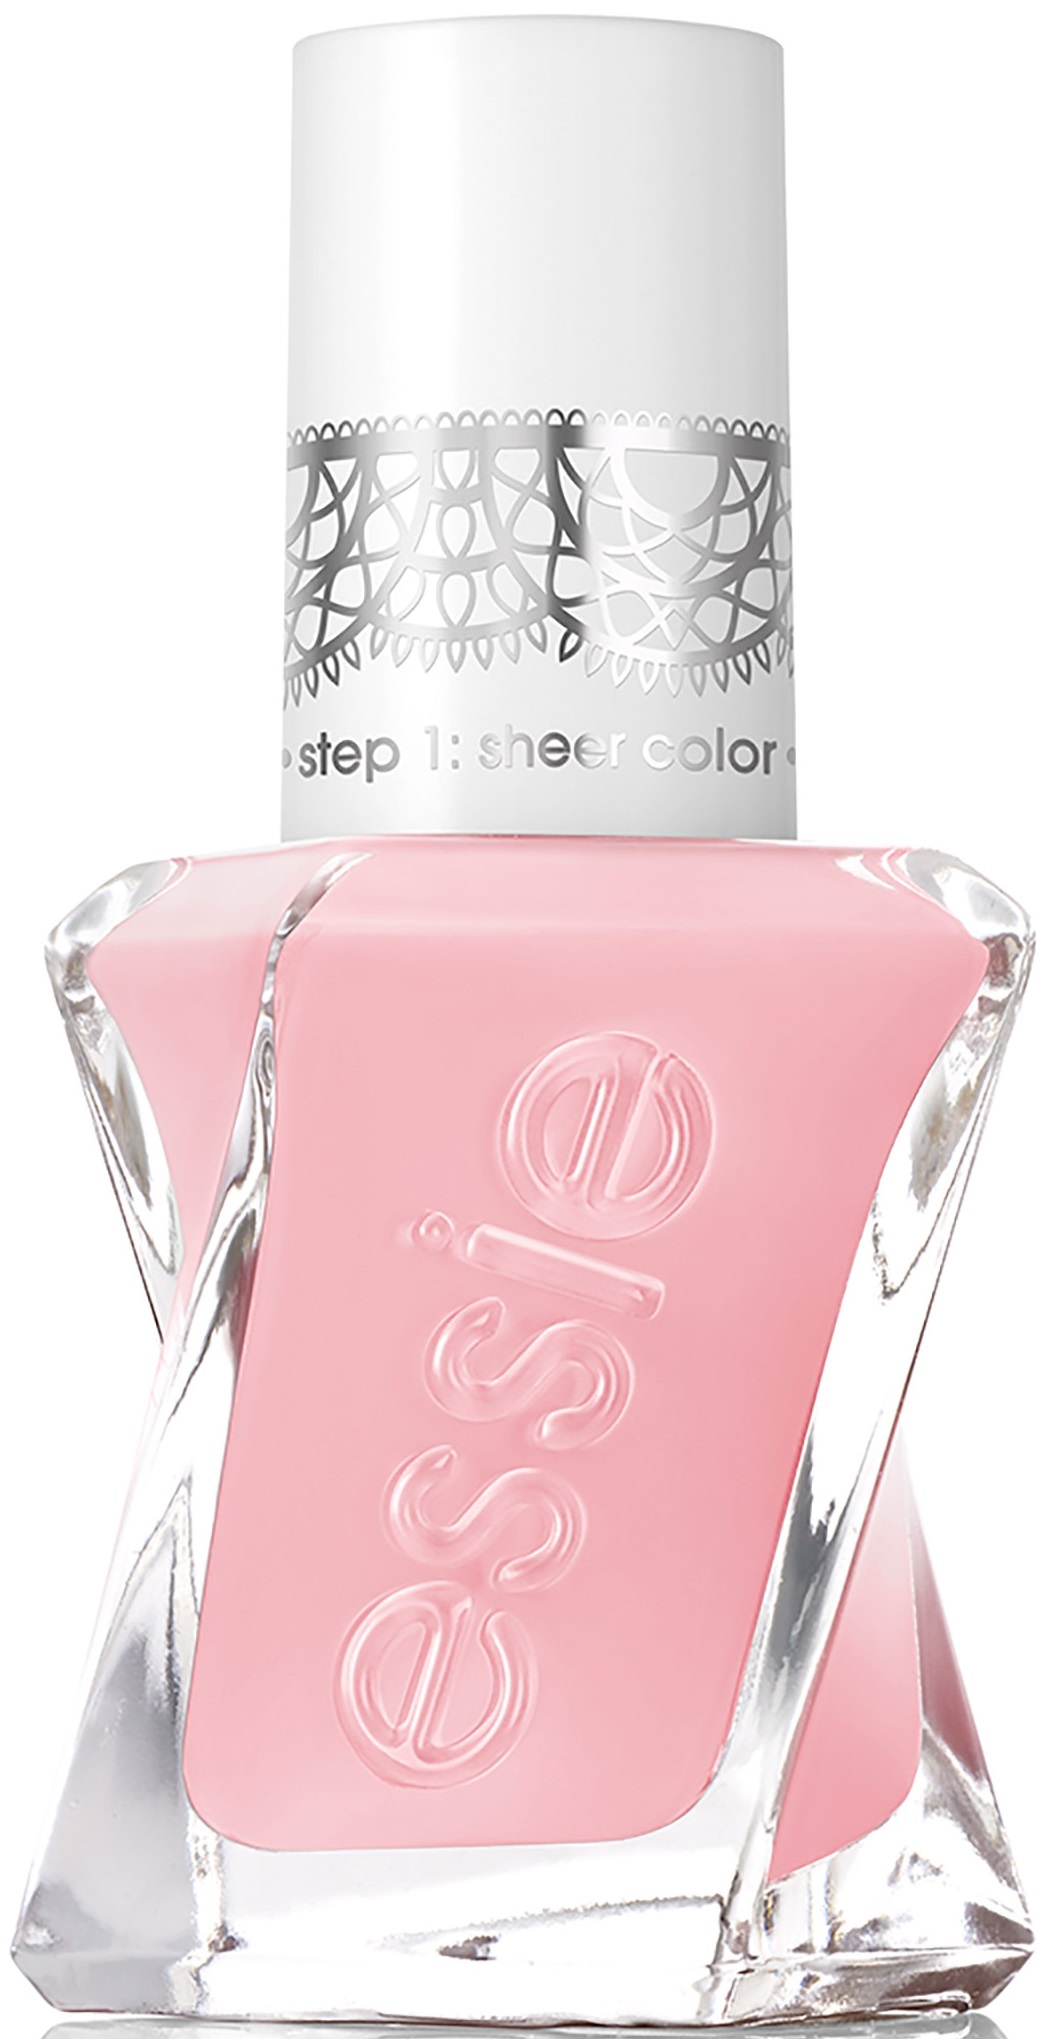 Essie Gel Nail Silhouettes Garments Polish Sheer Couture Gossamer 505 Collection